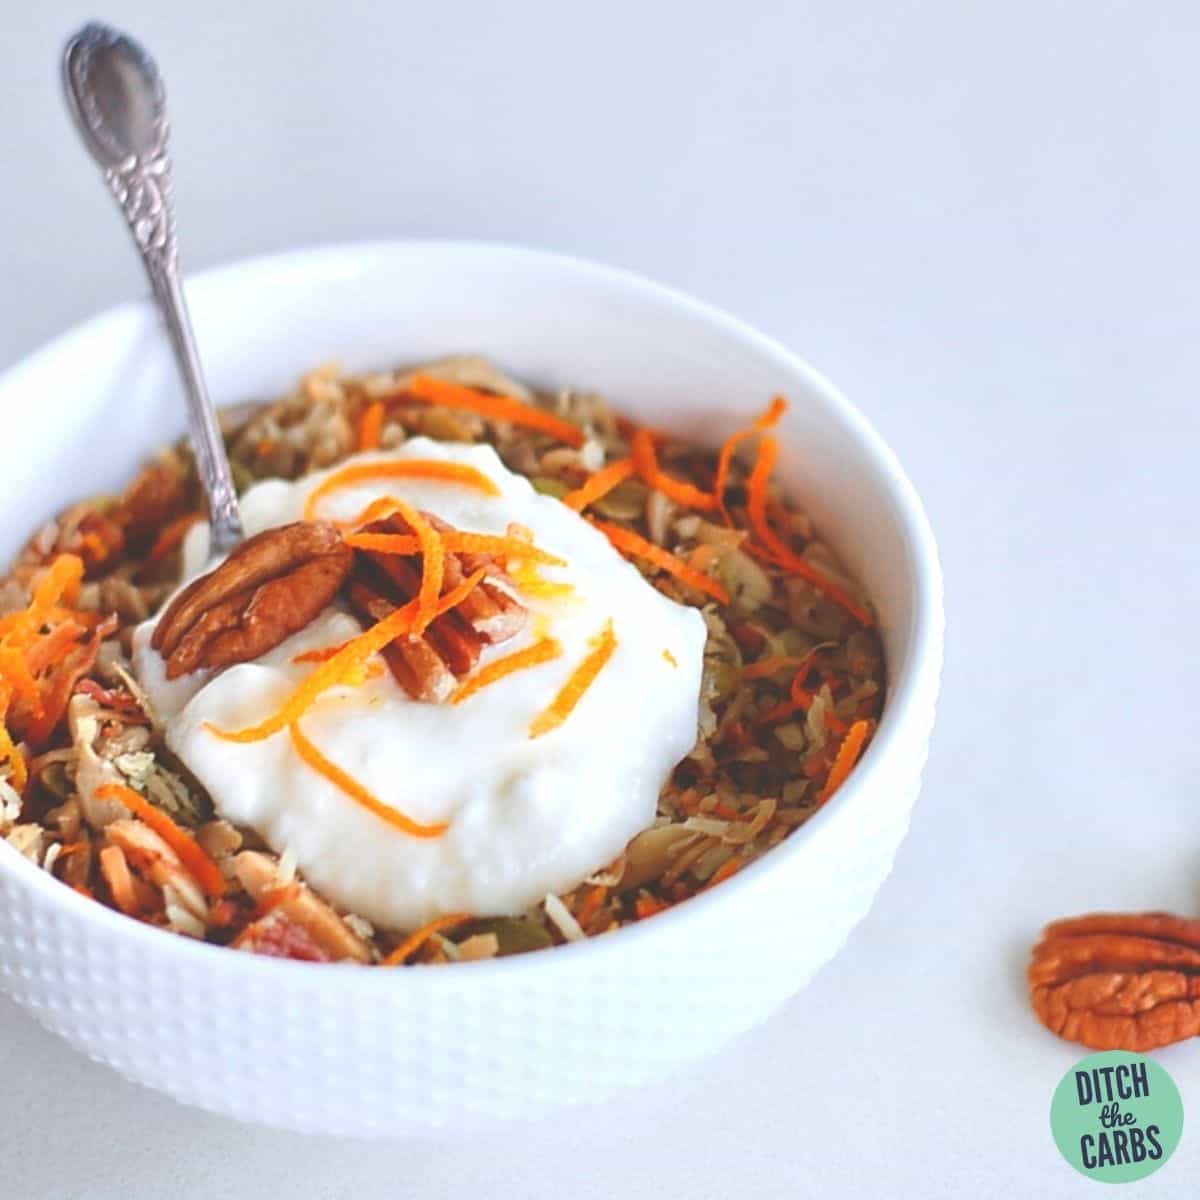 A bowl of gluten-free granola garnished with orange zest and pecans served with a silver spoon and yoghurt